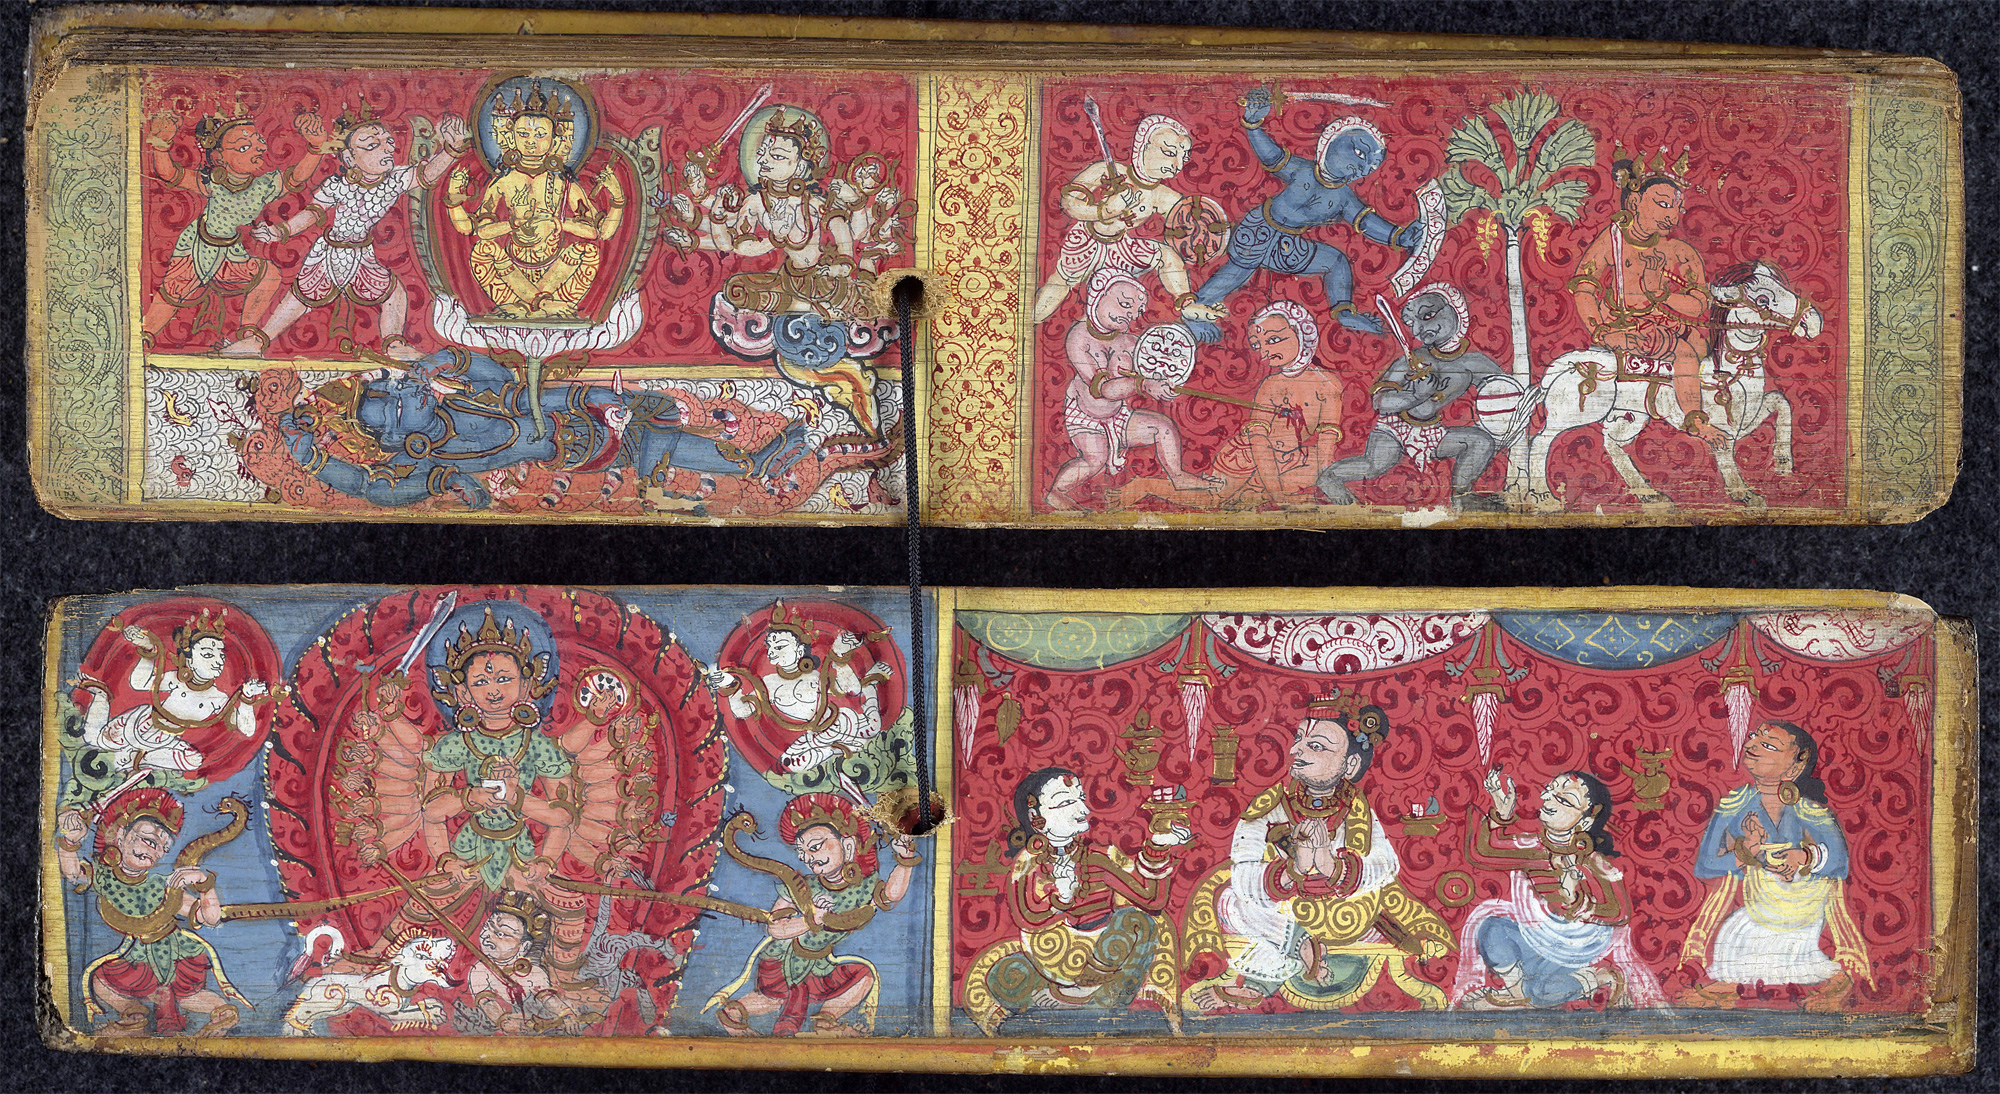 Upper folio left: the god Brahmā asking Devī to wake the reclining Vishnu from his slumber so that he may kill the demons Madhu and Kaitabha. Upper folio right: King Suratha after being deposed retires to the forest where he becomes a fervent devotee of the Goddess. Lower folio left: the Goddess. Lower folio right, the patron and his family, from the Devi Mahatmya, 16th century (British Library)